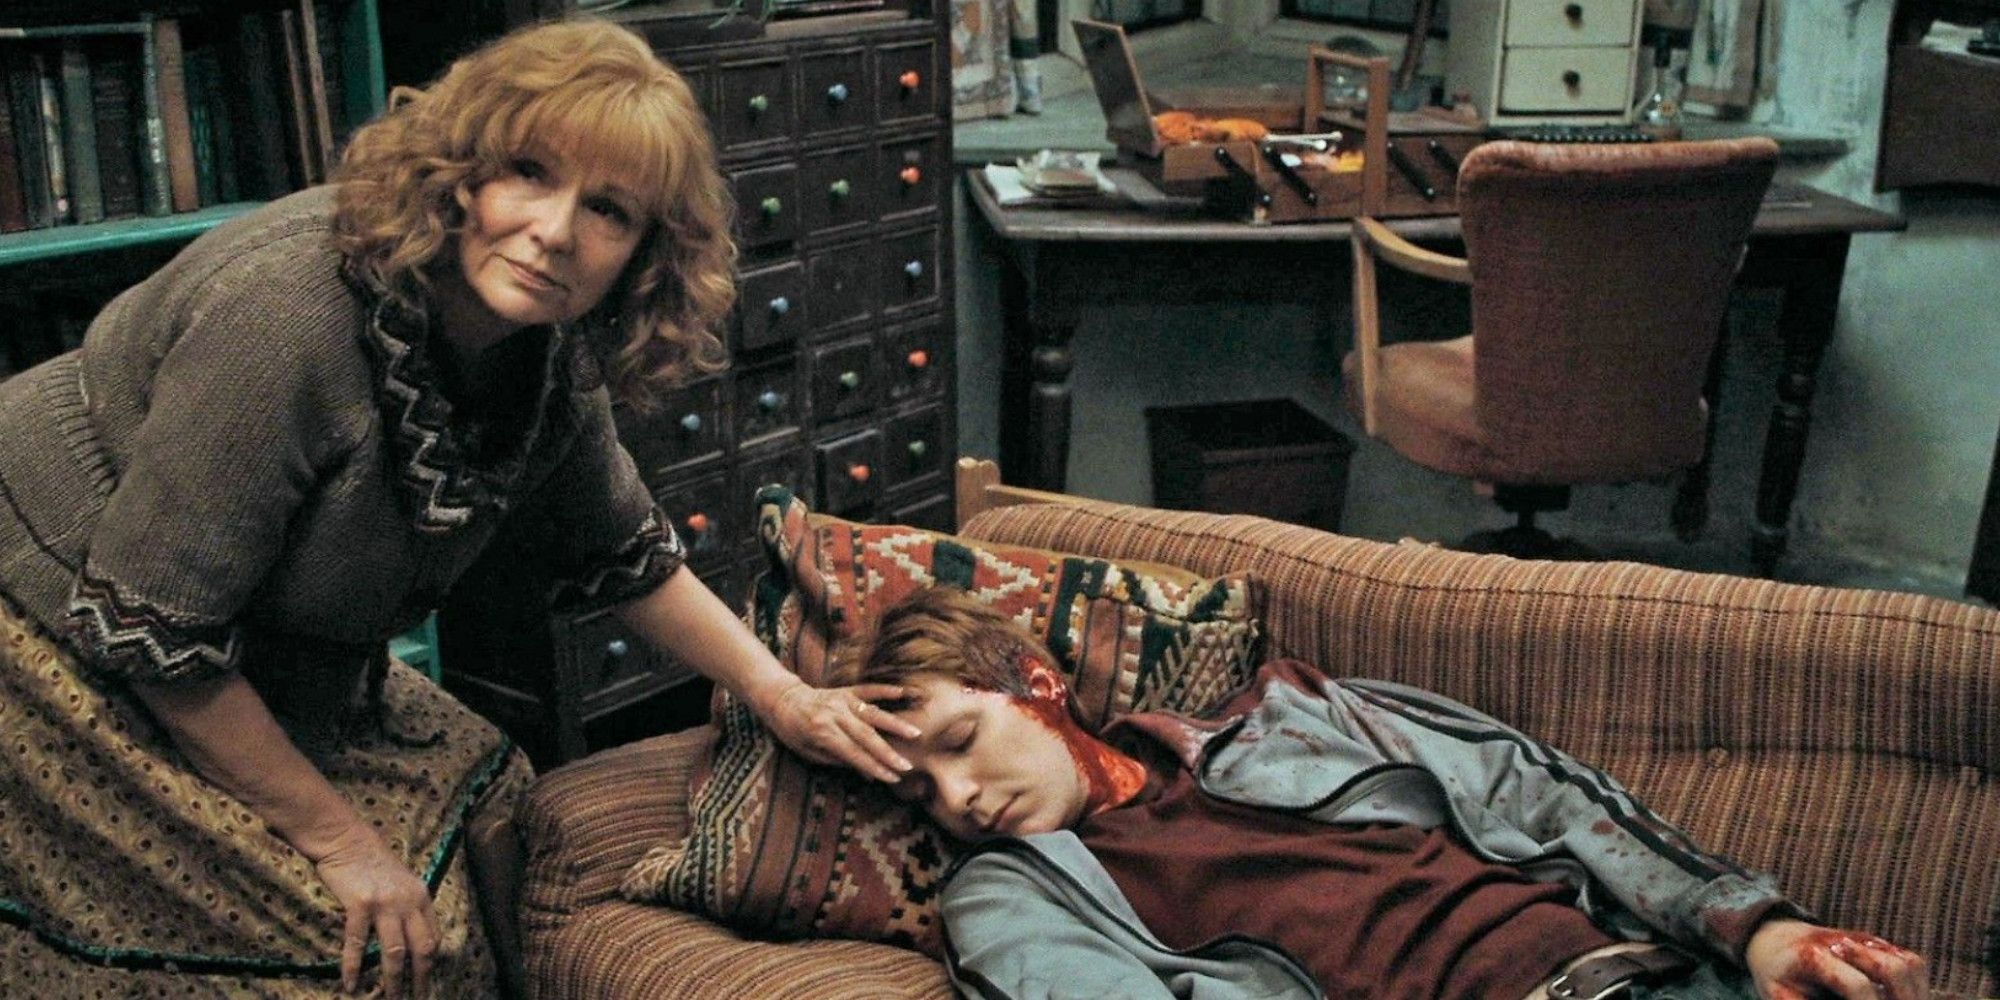 Harry Potter Ways The Movies Mishandled the Weasleys George and Molly